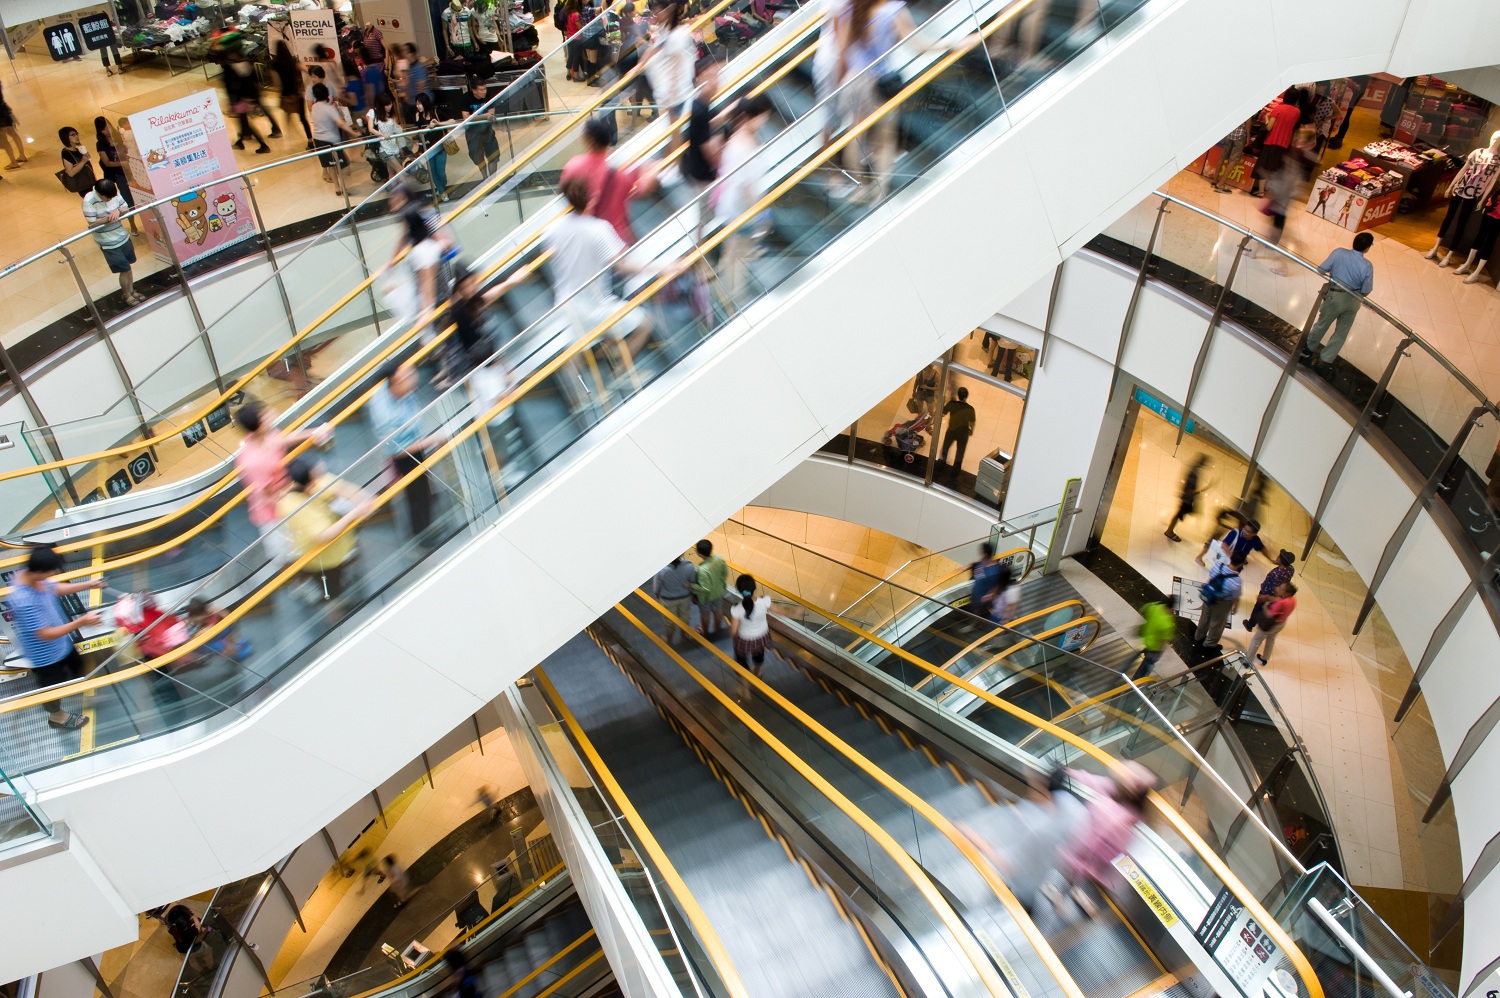 The Use of Social Data for Retail Demand Forecasting